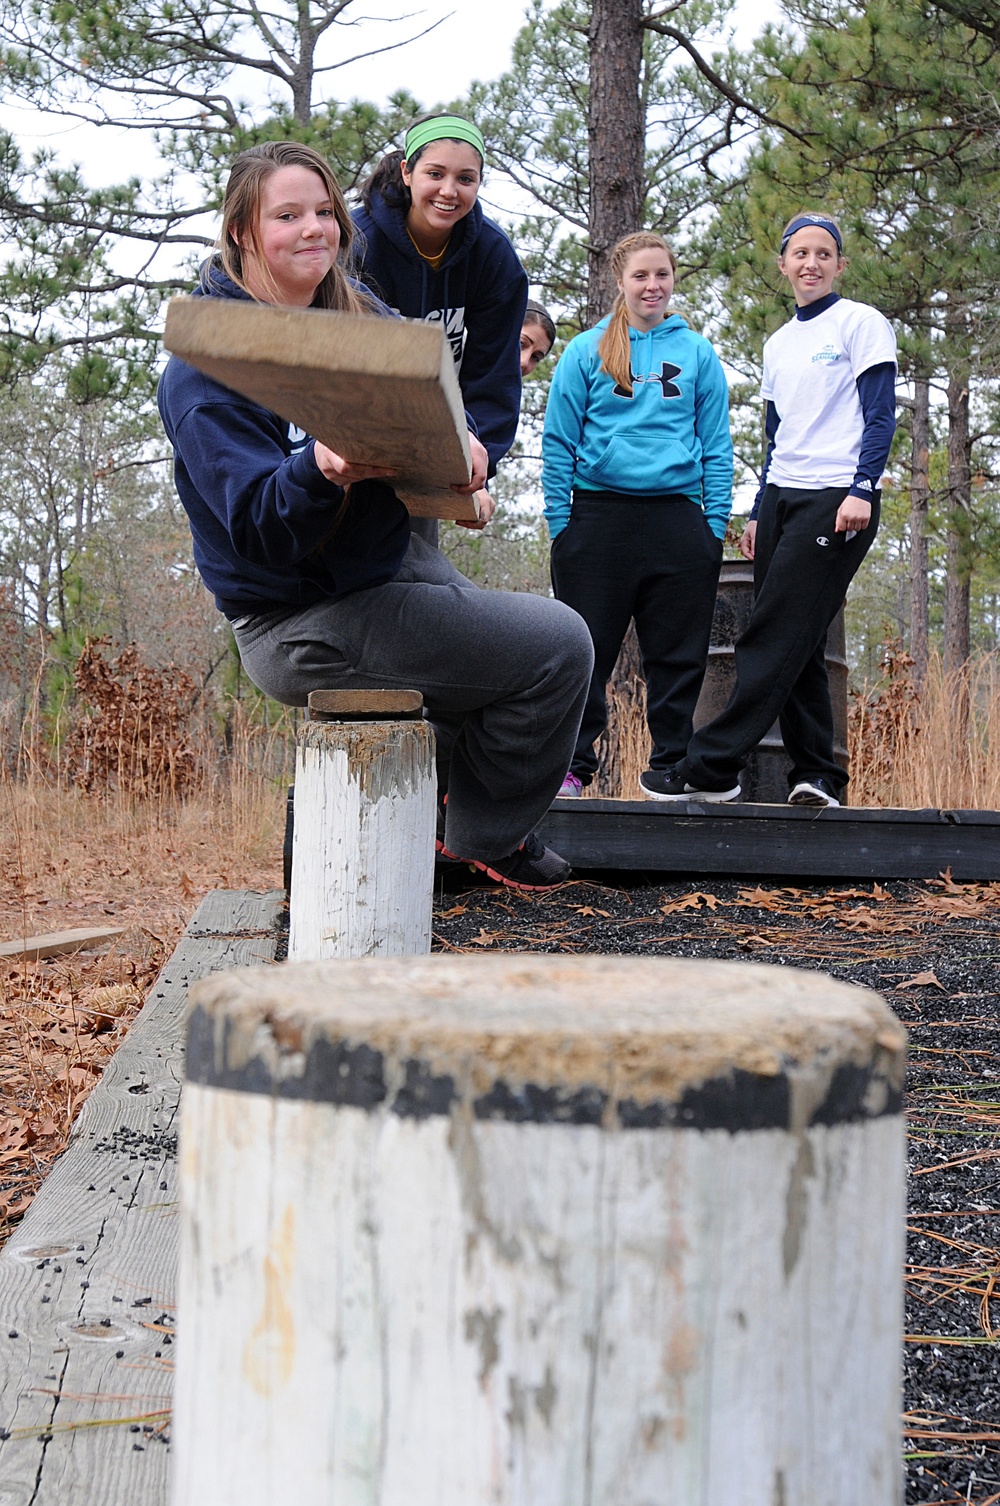 UNC-W softball team overcomes obstacles with support of Falcon paratroopers